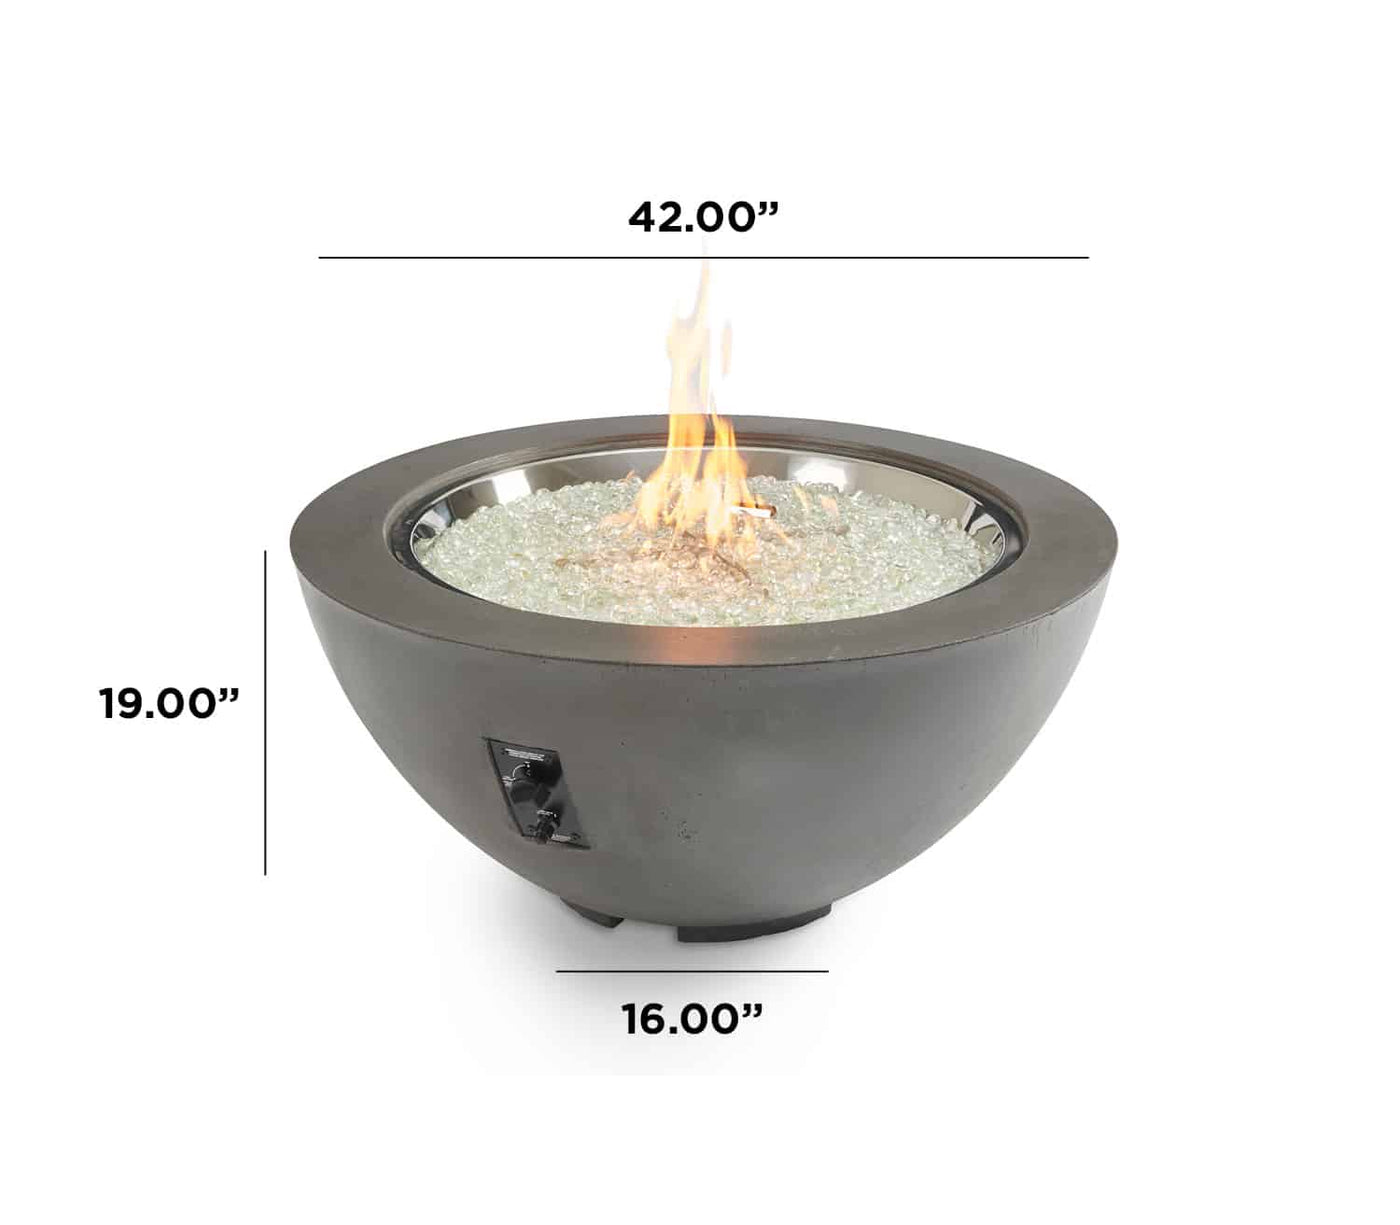 The Outdoor GreatRoom Company Midnight Mist Cove 42" Round Gas Fire Pit Bowl